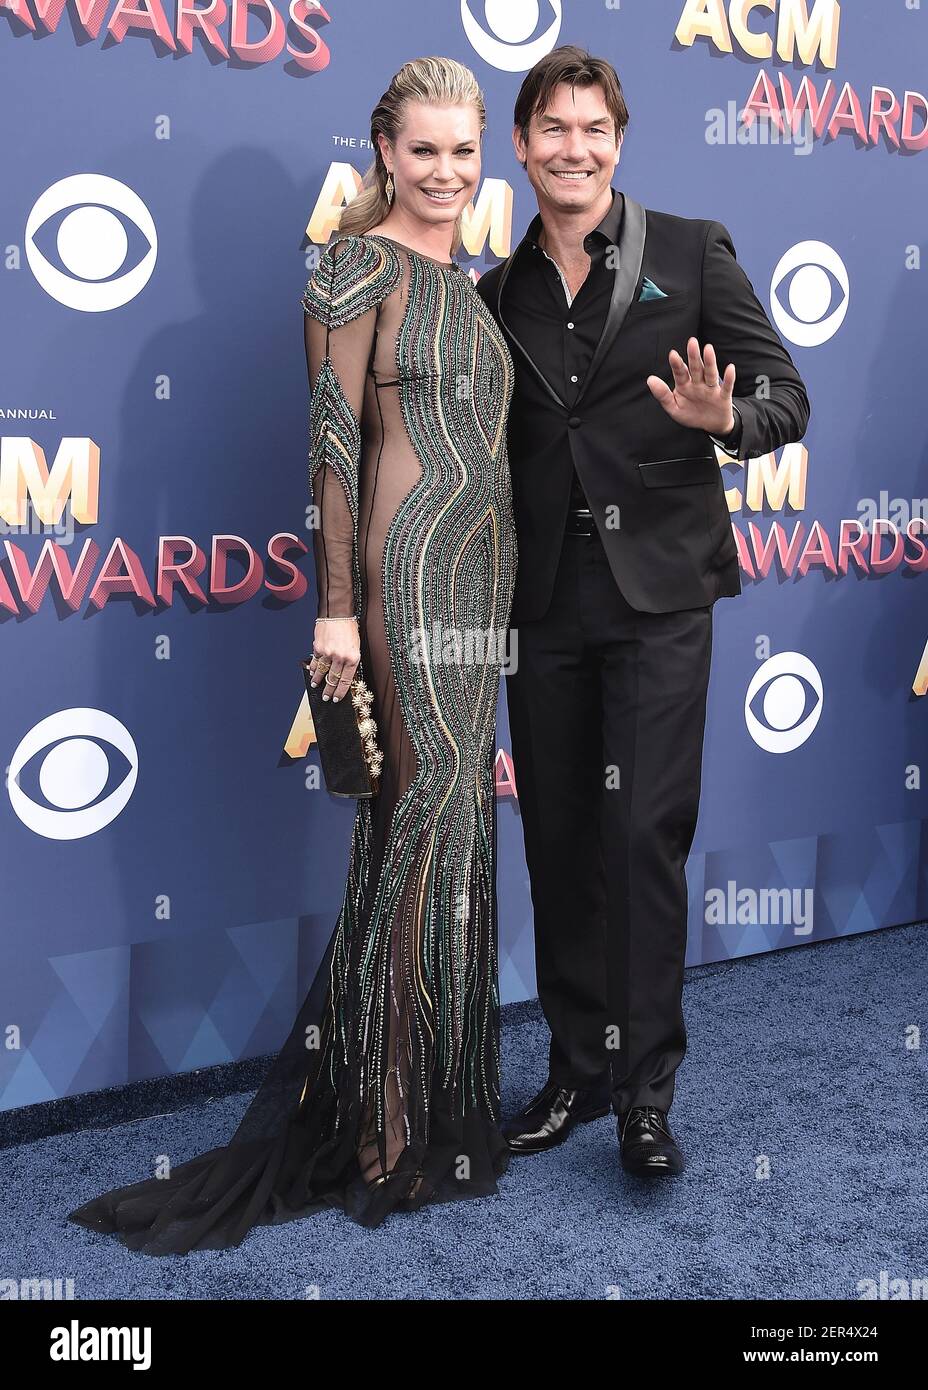 LAS VEGAS, NV - APRIL 15: Rebecca Romijn and Jerry O'Connell at the 53rd  Annual Academy of Country Music Awards at MGM Grand Garden Arena on April  15, 2018 in Las Vegas,